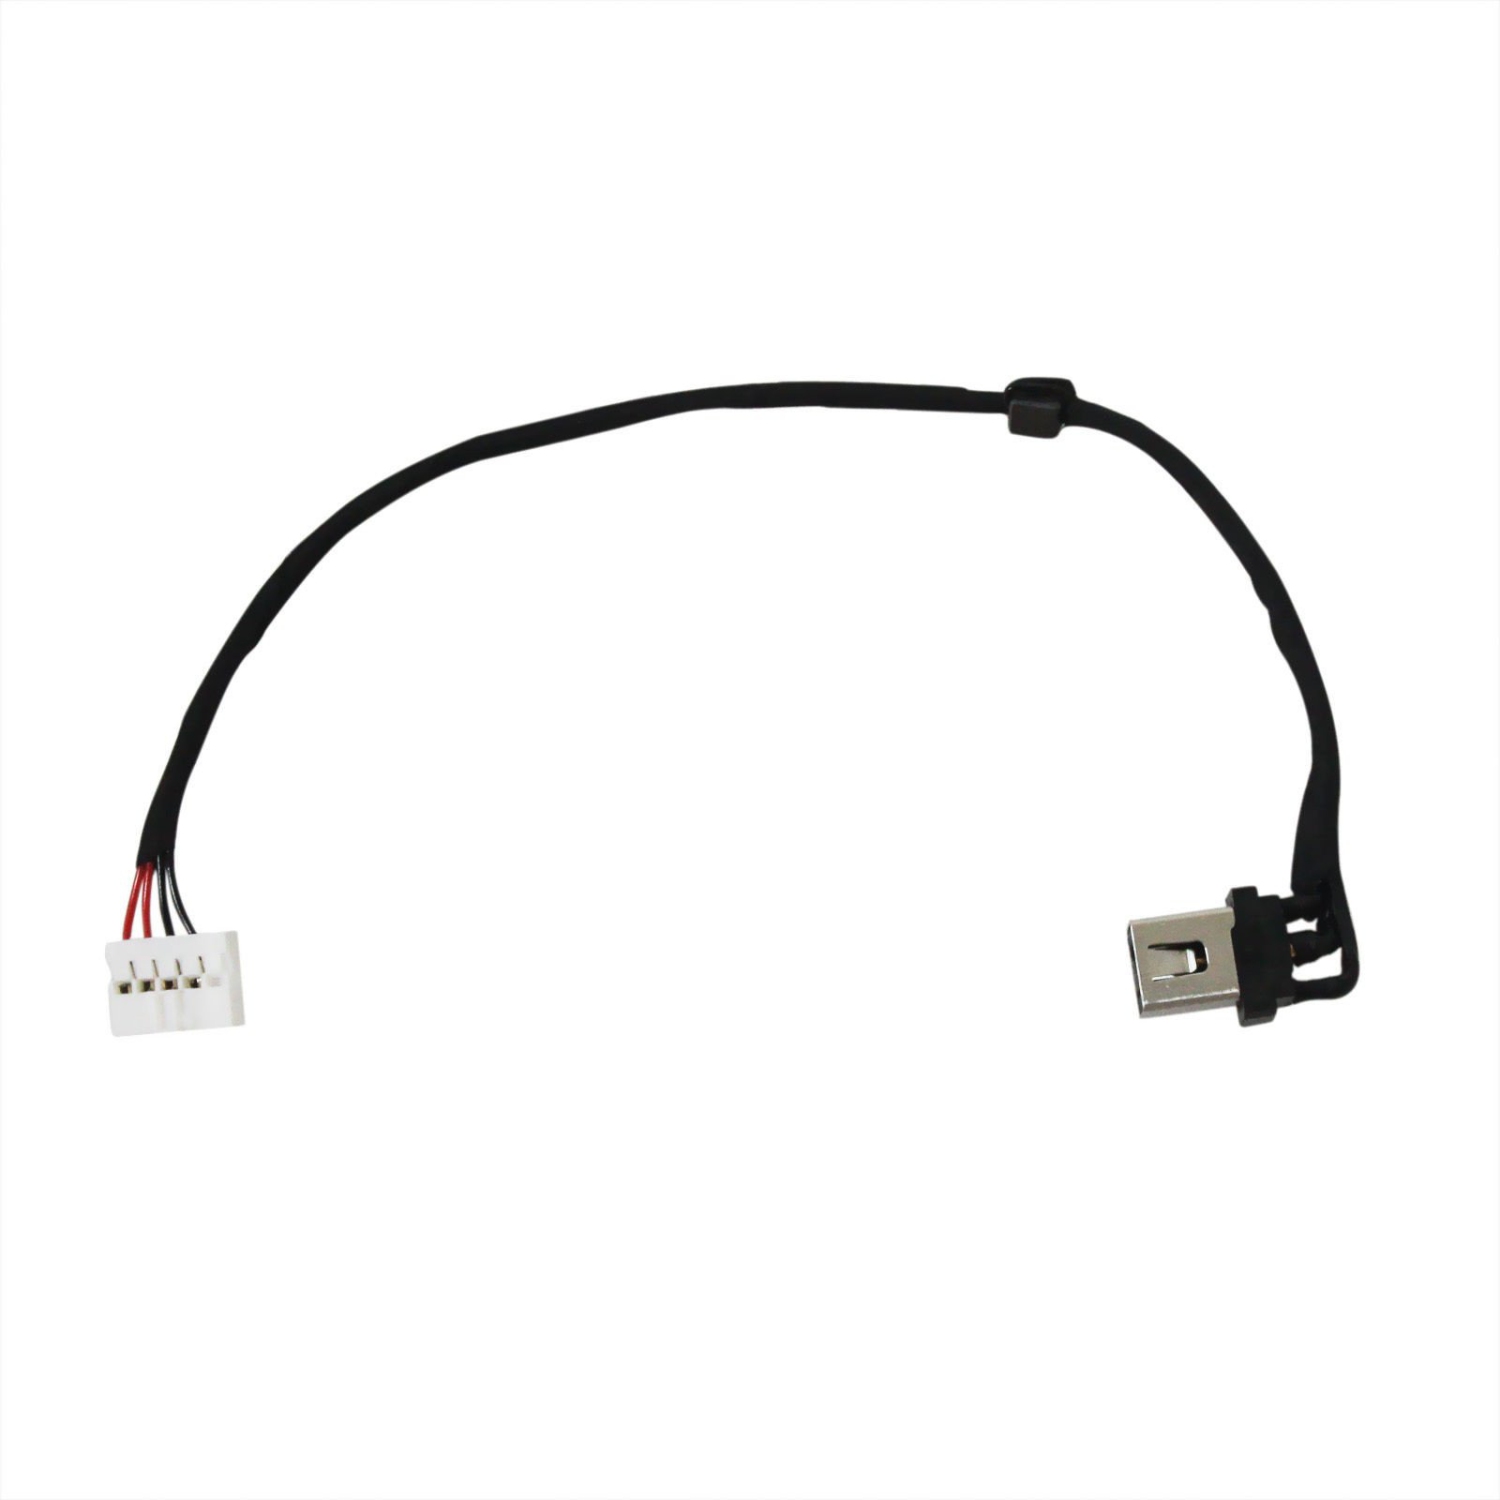 New Genuine Lenovo Ideapad 100-14 100-14IBY 100-15IBY DC30100VN00 DC Power Jack Cable